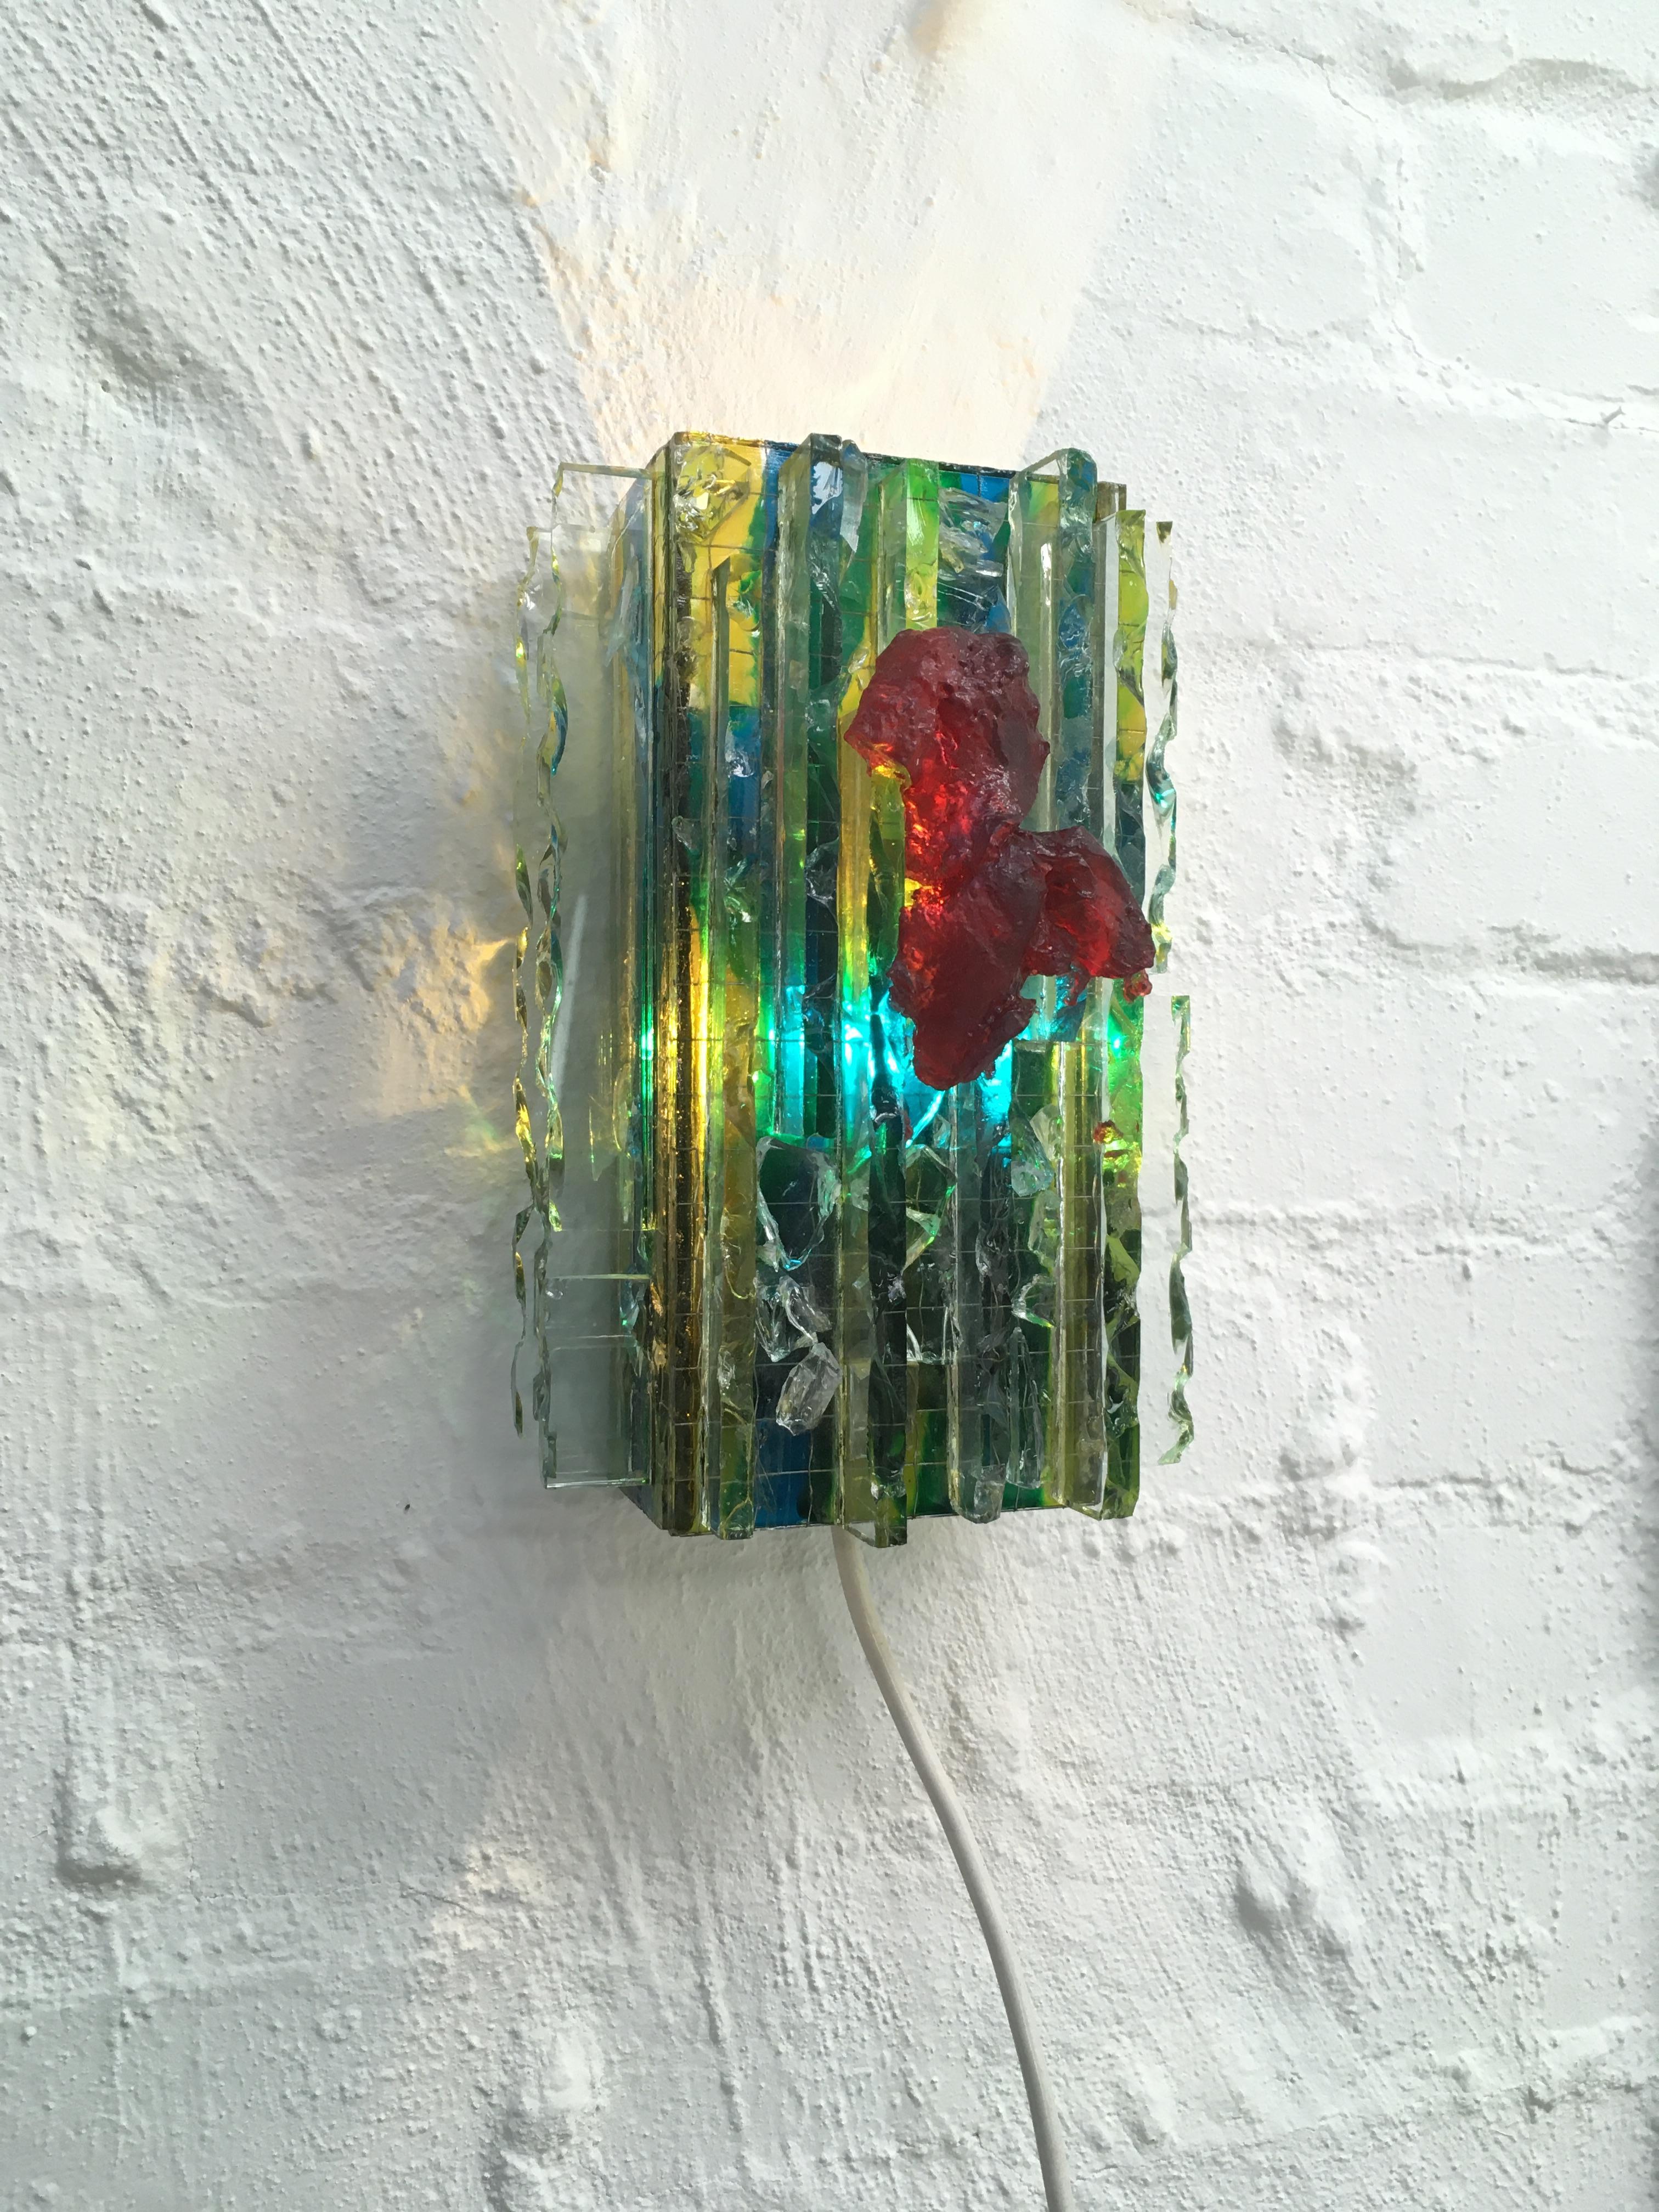 Appliqué Chartres Lamp or Sconce by Willem van Oyen for RAAK Amsterdam 1970s